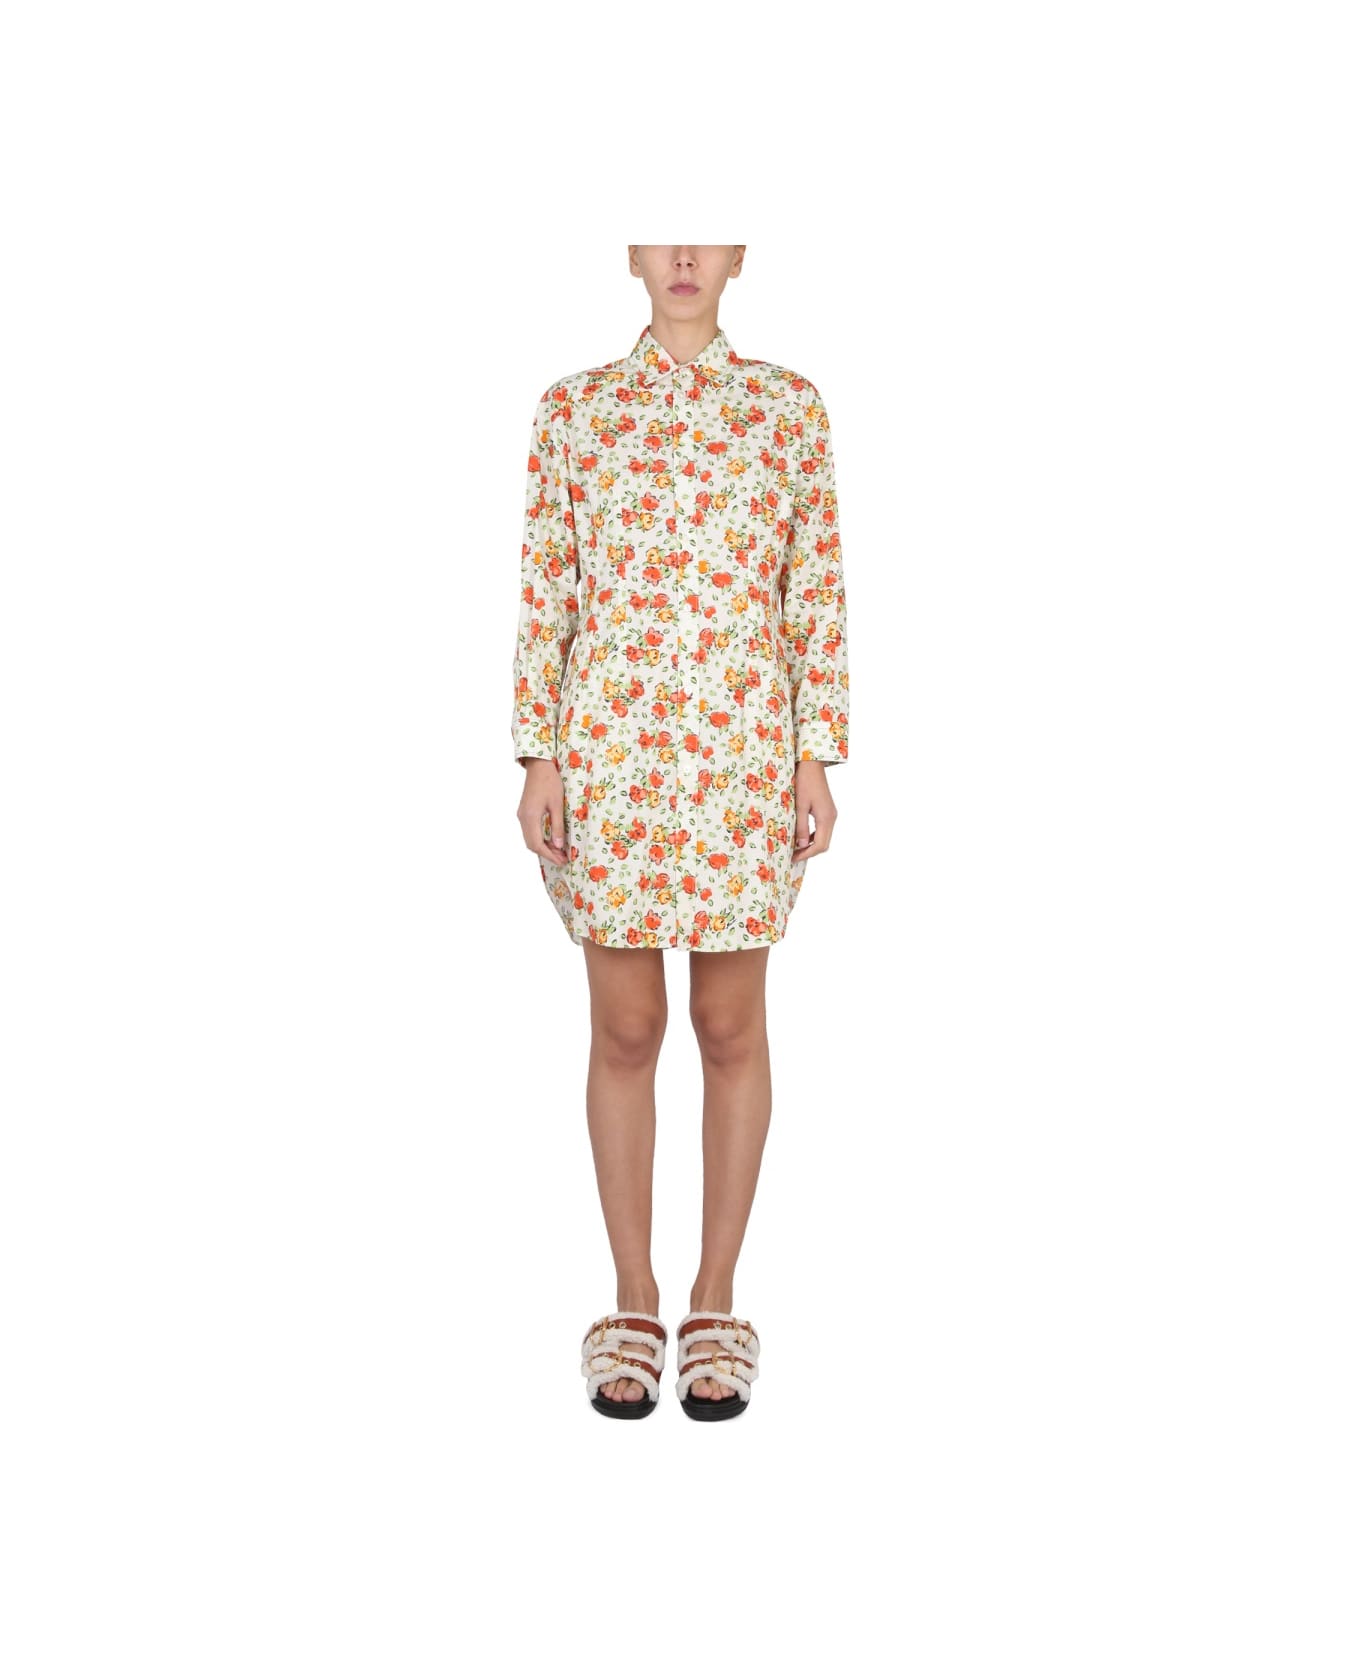 Marni Shirt Dress With Floral Pattern - MULTICOLOUR